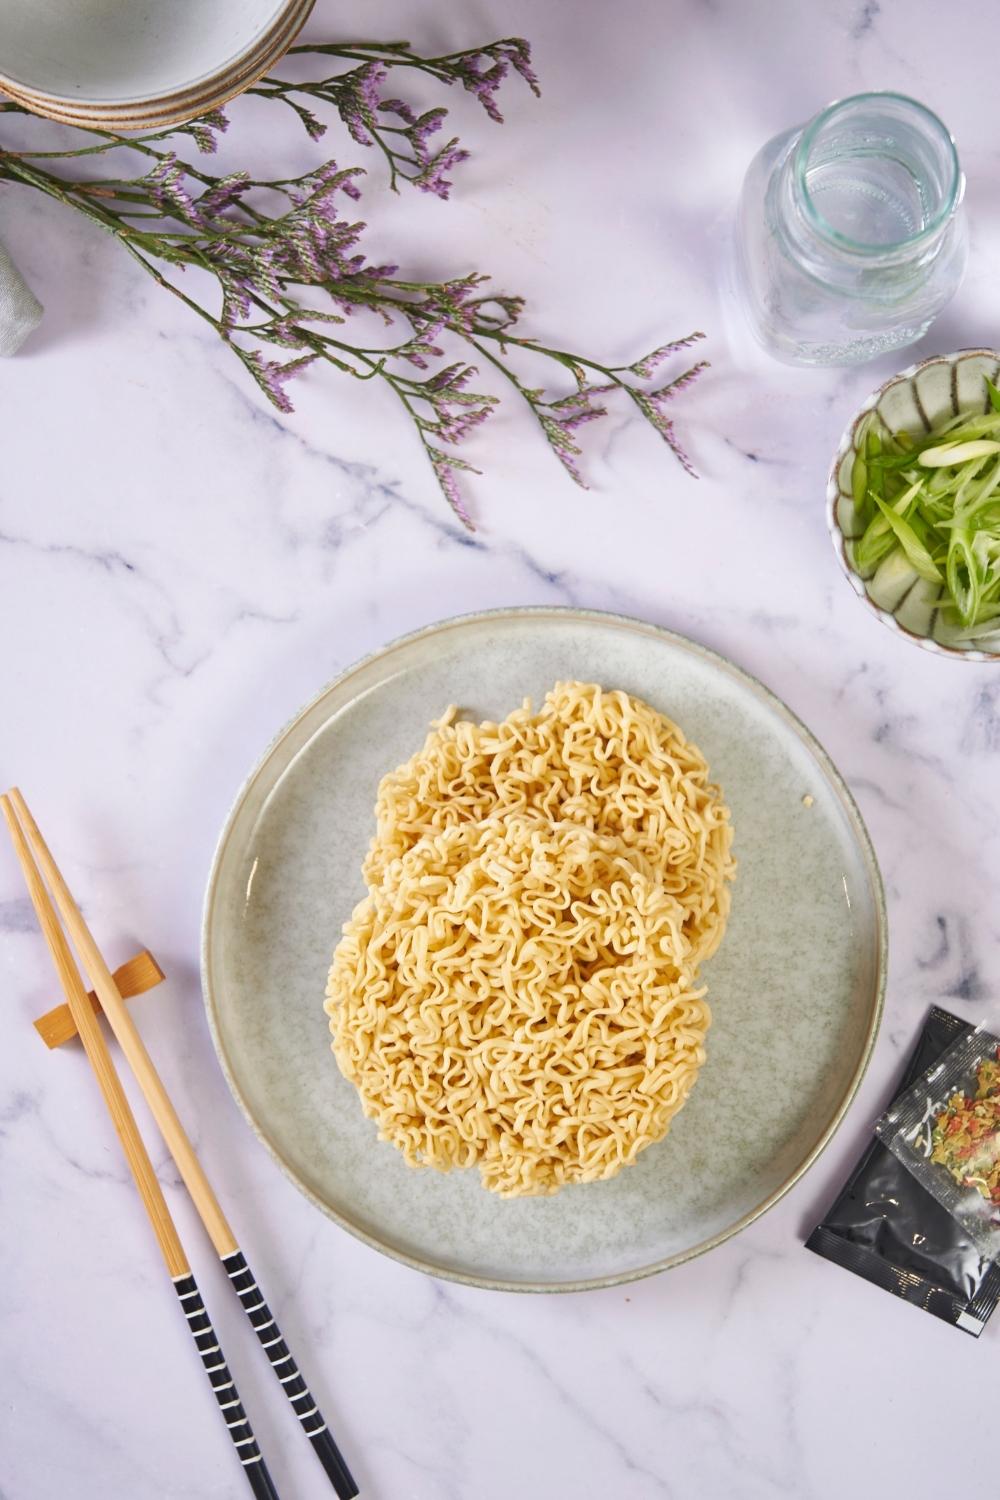 Two discs of uncooked ramen noodles on a blue plate, next to a pair of chopsticks and a small bowl of diced green onion.